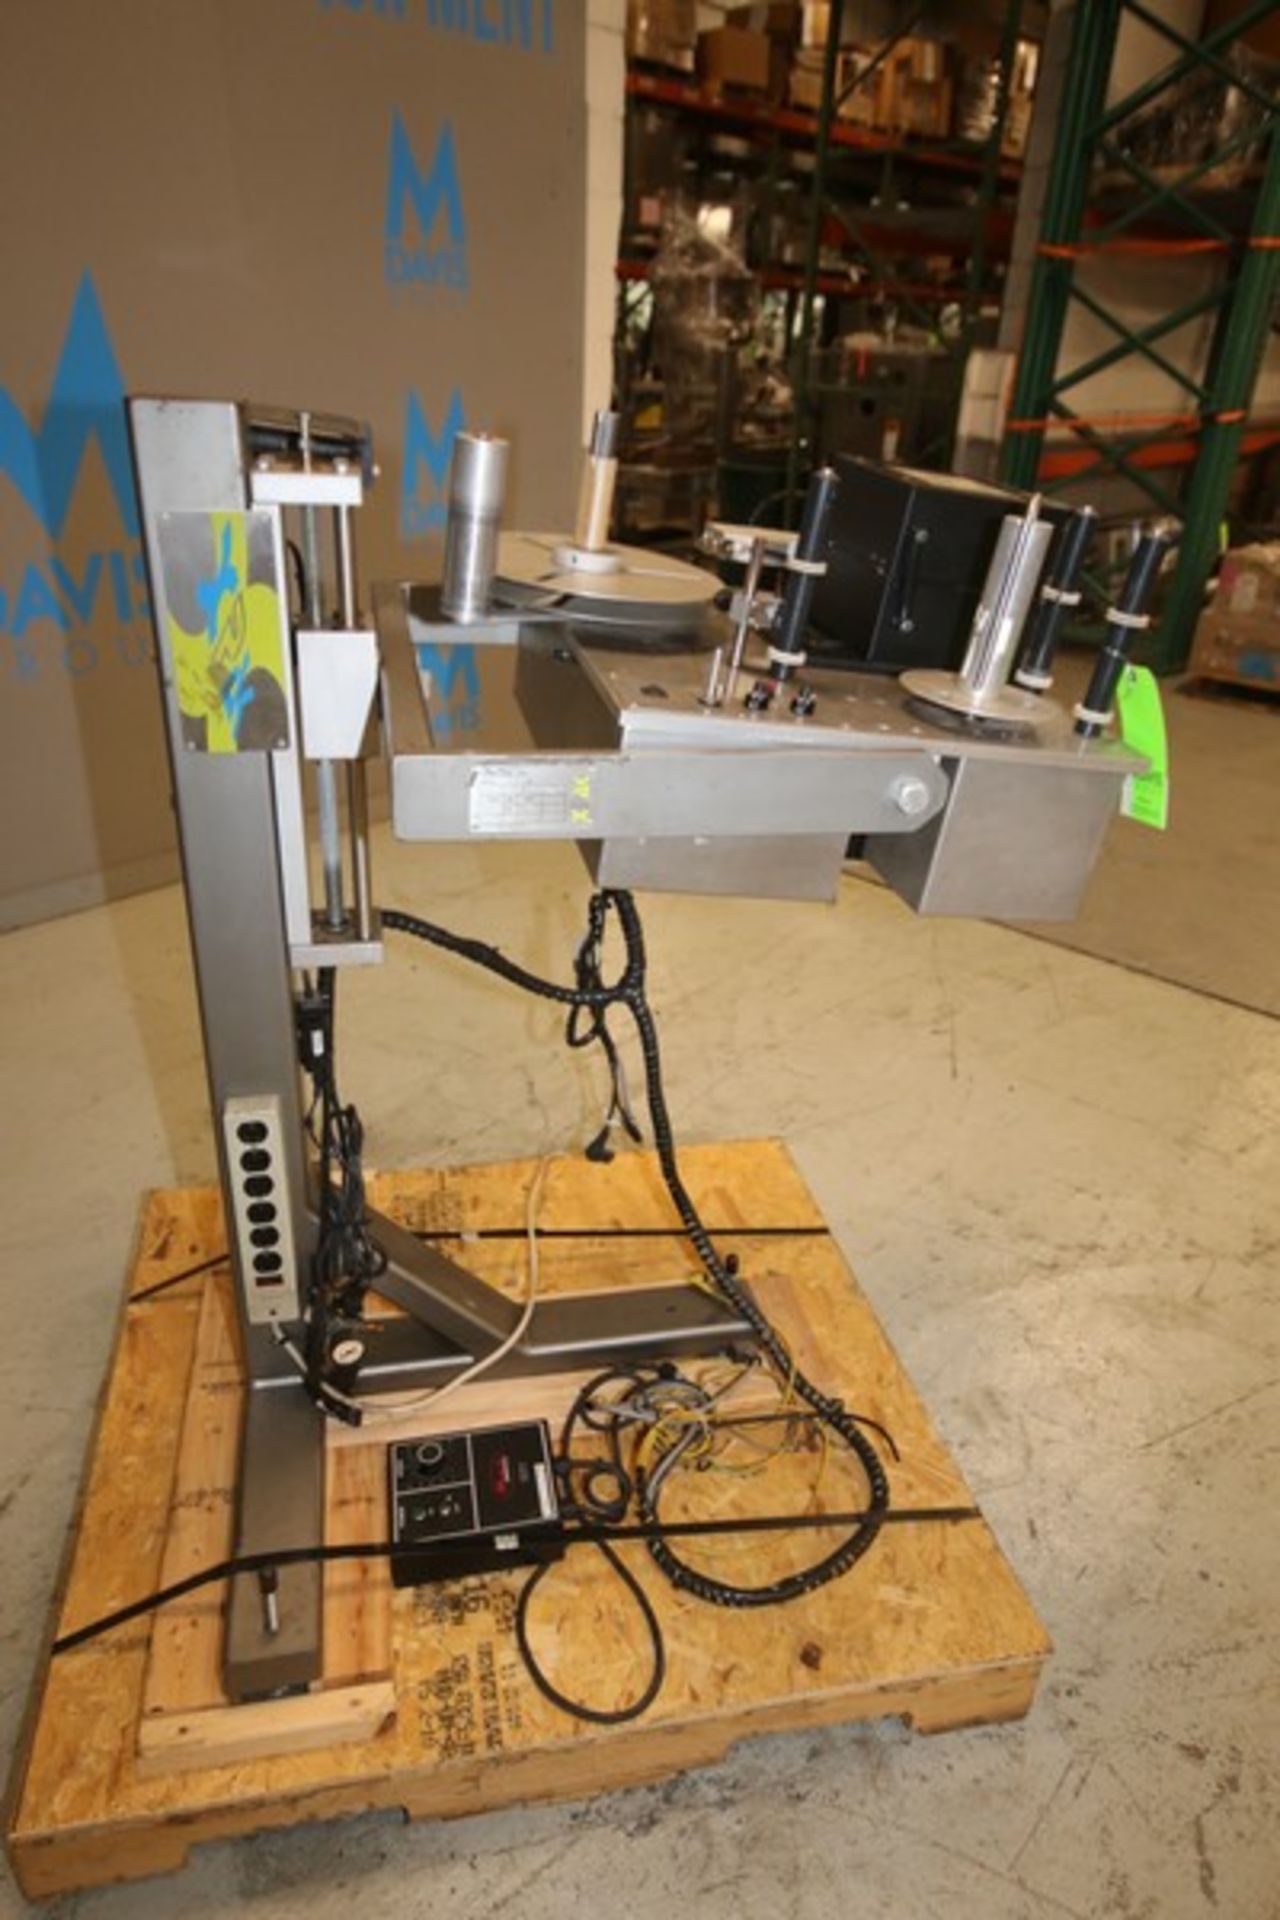 XPak Roll Fed Labeler, Model XP-A8200, SN SX052010, 115V, Mounted on Stand with Top Mounted Sato M- - Bild 7 aus 8